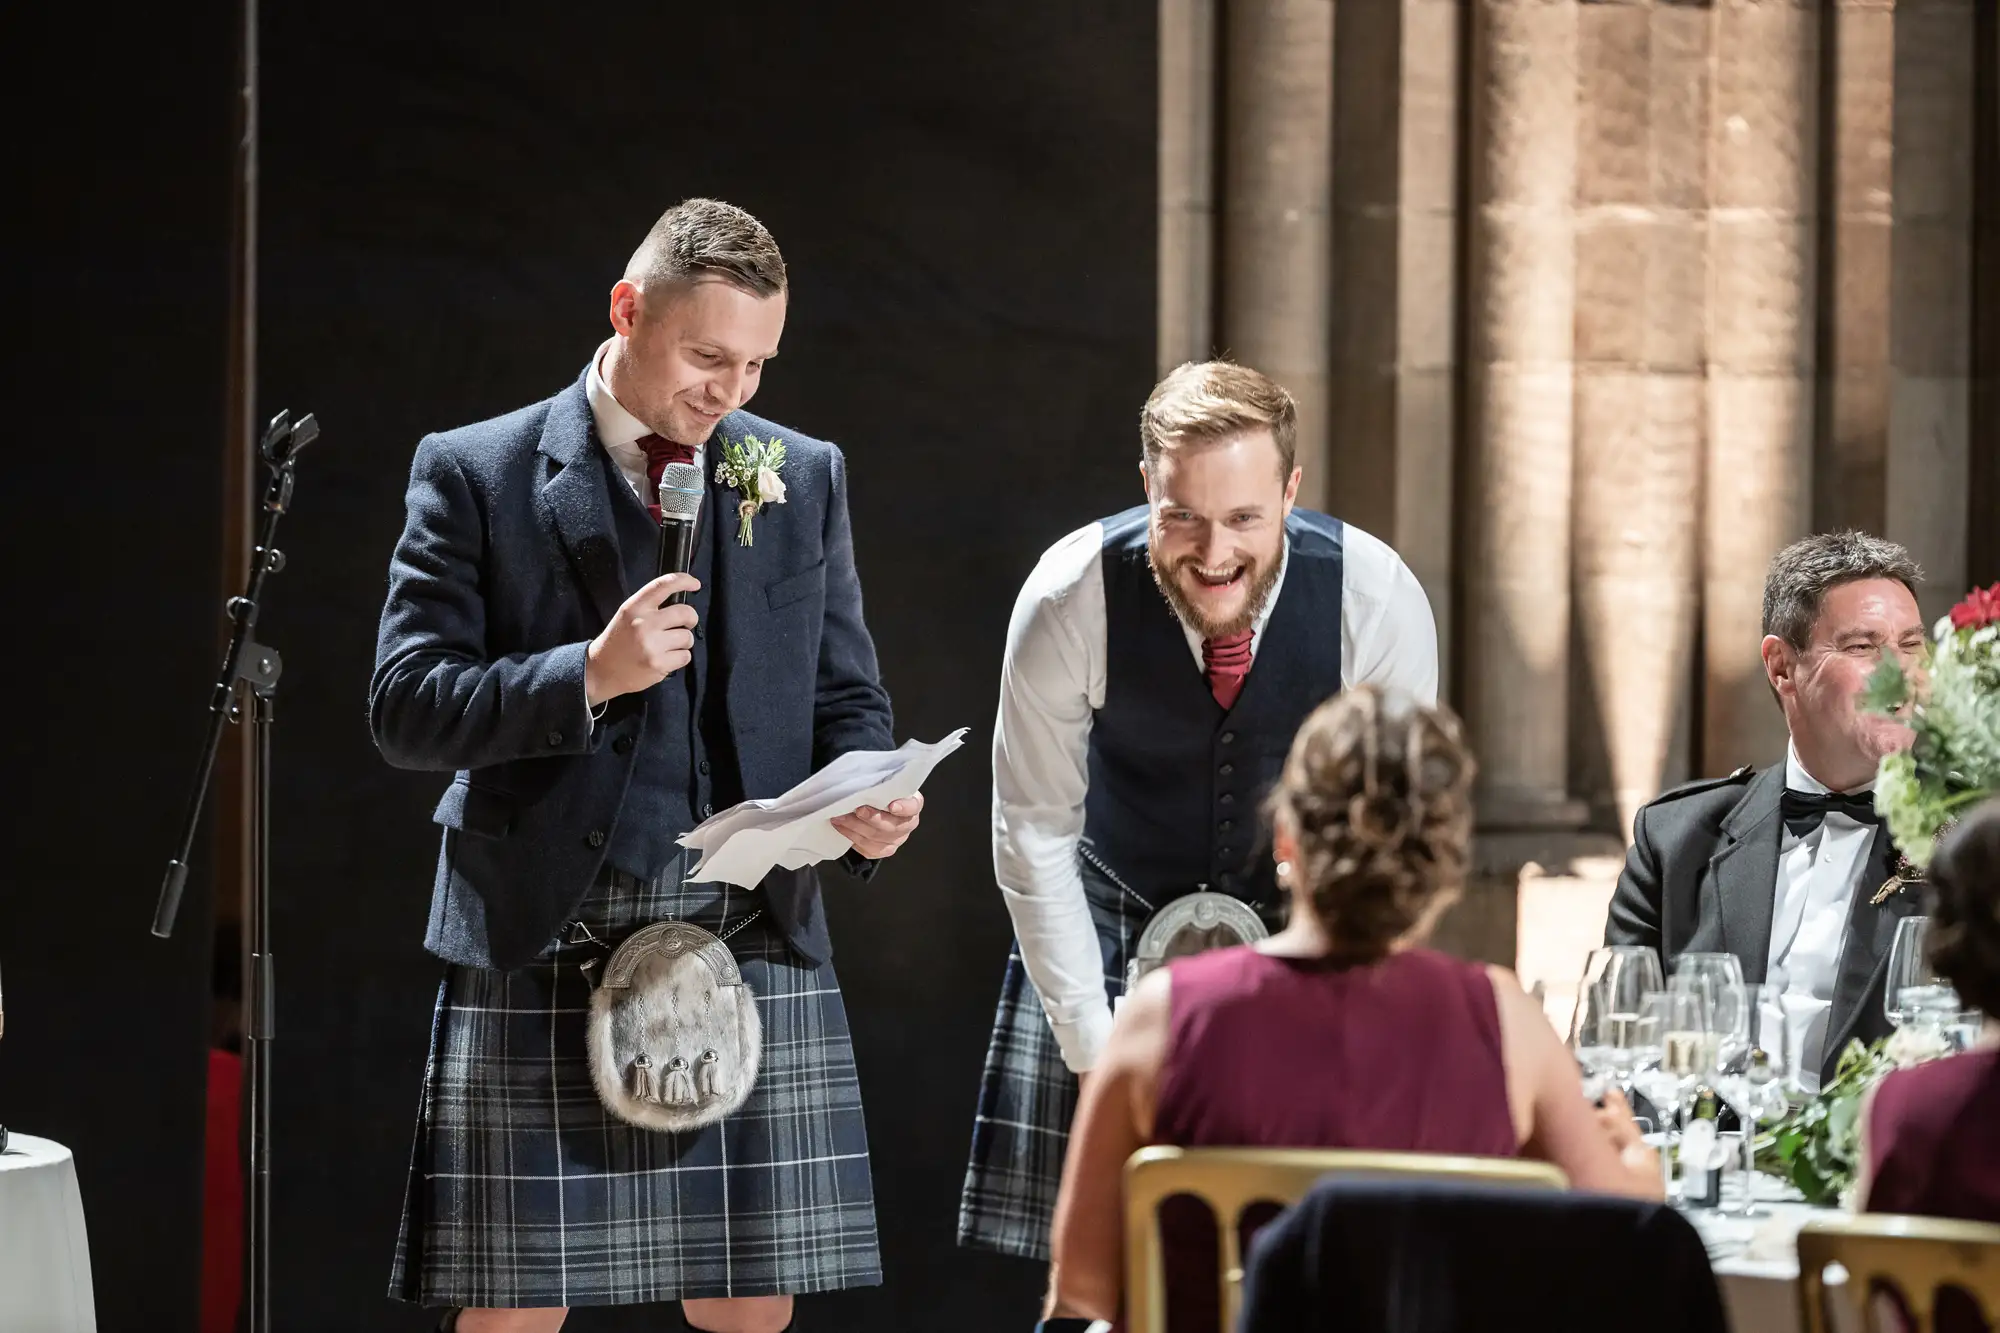 Two men at a wedding reception, one in a kilt reading a speech and smiling, the other listening and laughing, with guests seated around them.